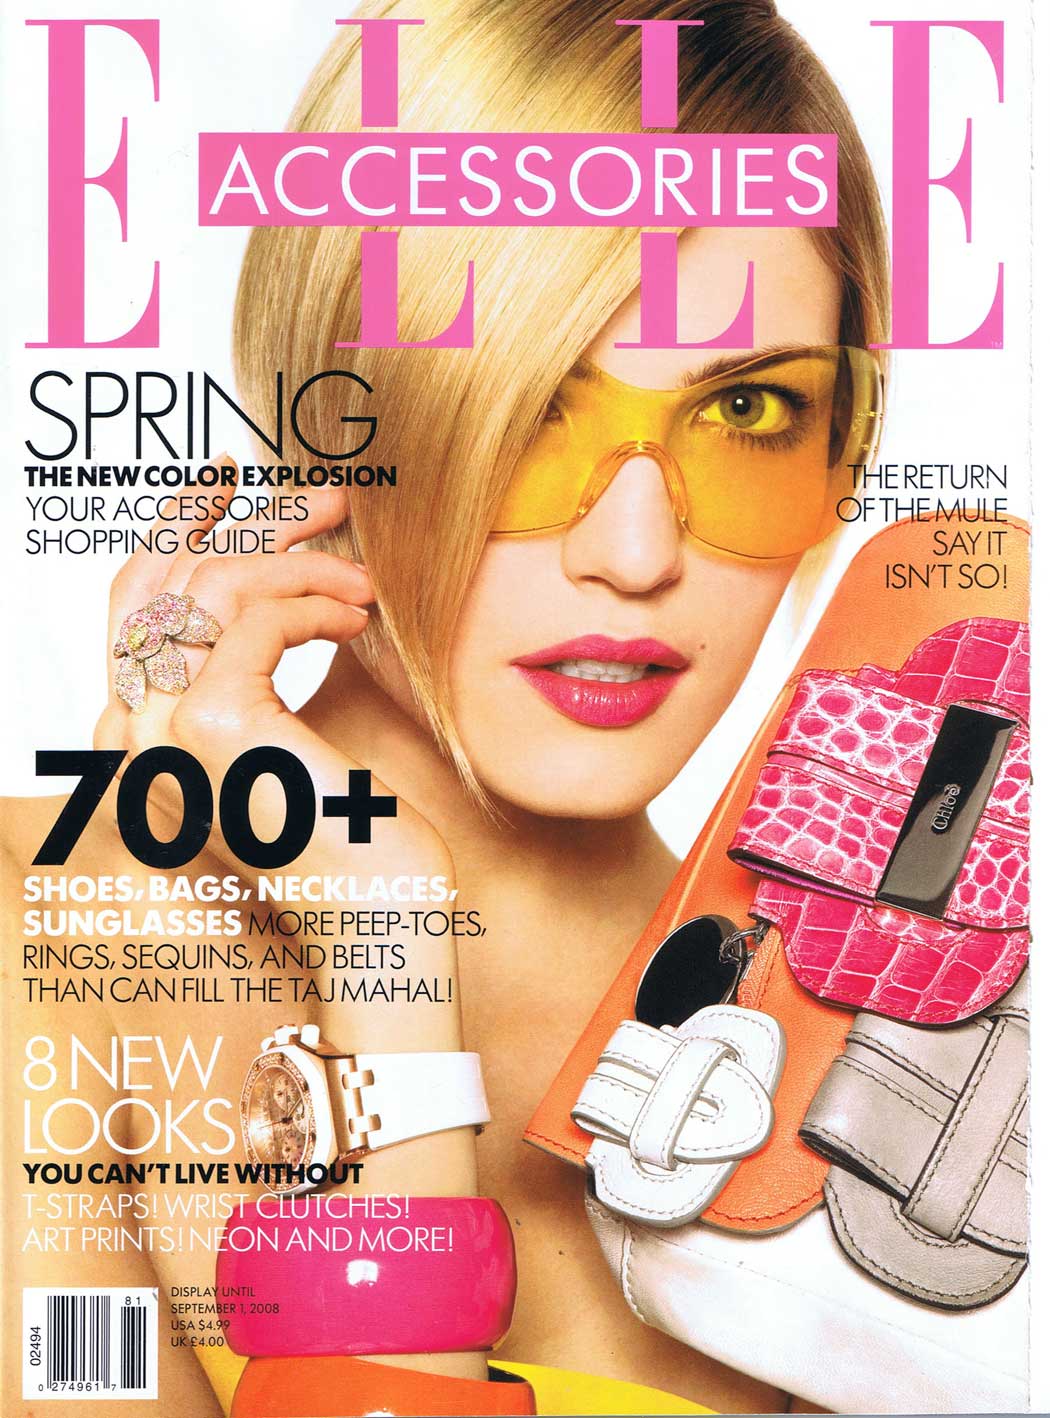 Covers of Elle Accessories , 958 2008 | Magazines | The FMD